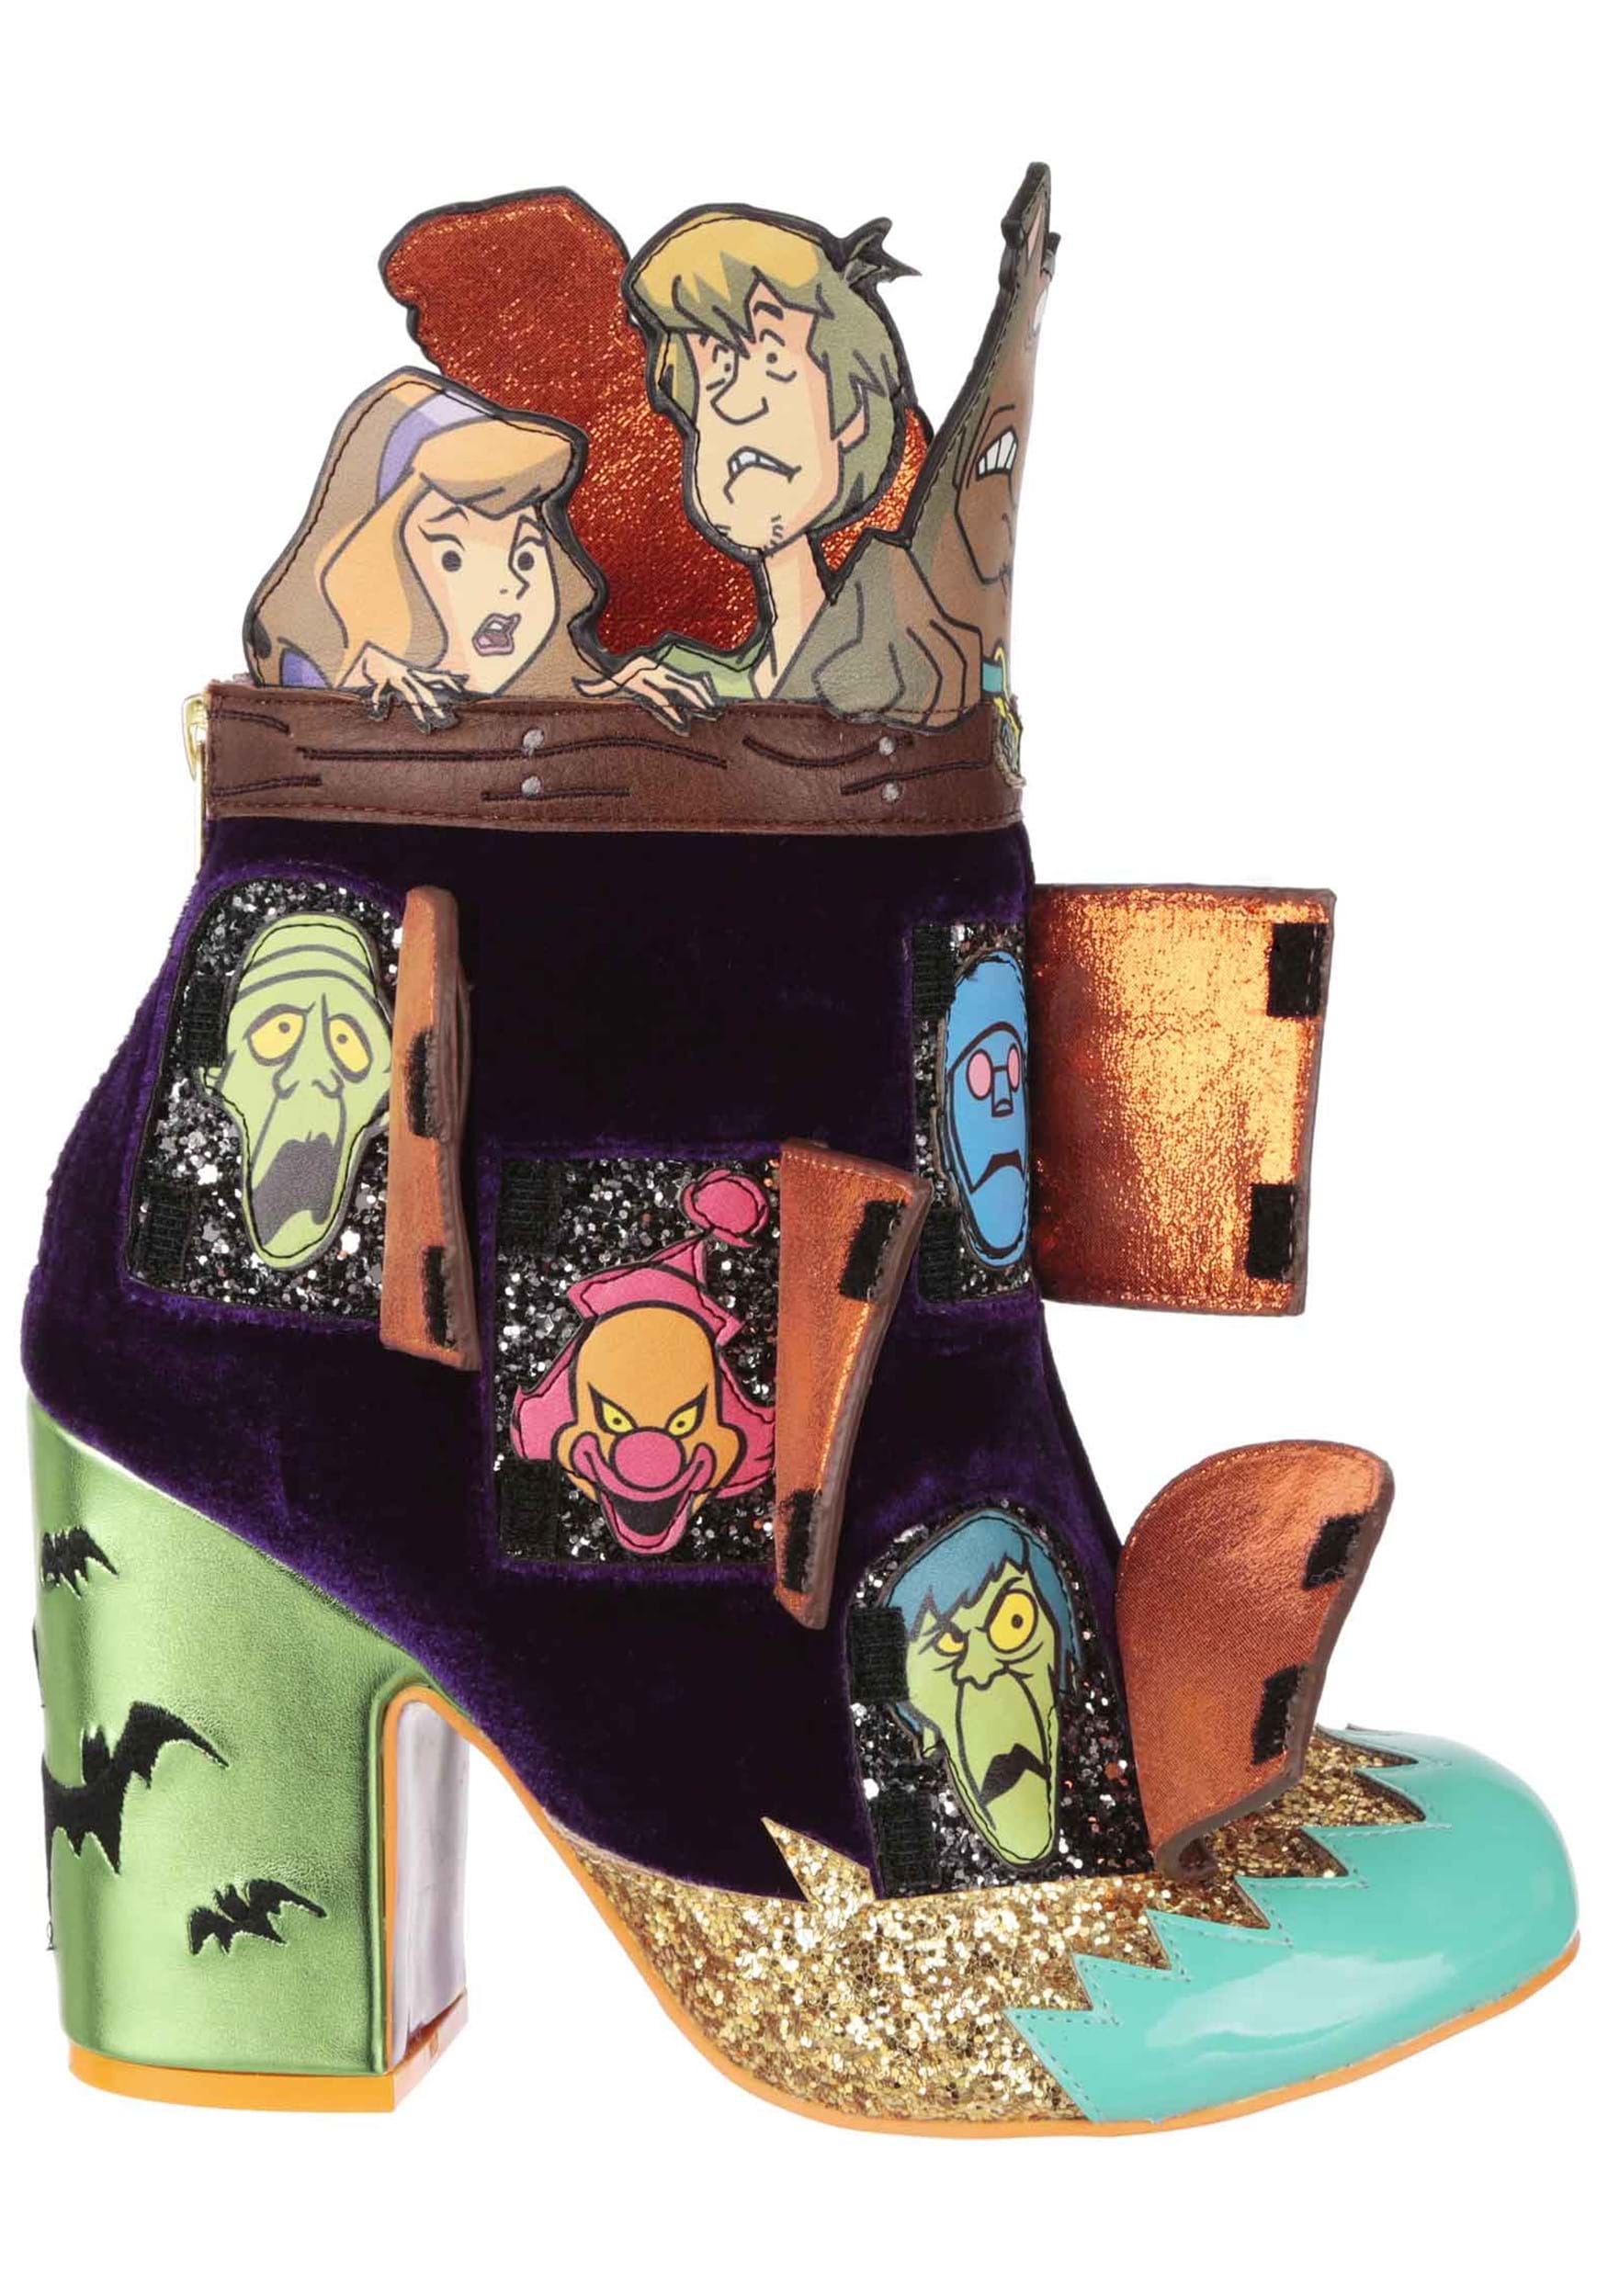 Irregular Choice Scooby Doo Behind The Door Ankle Boots For Adults